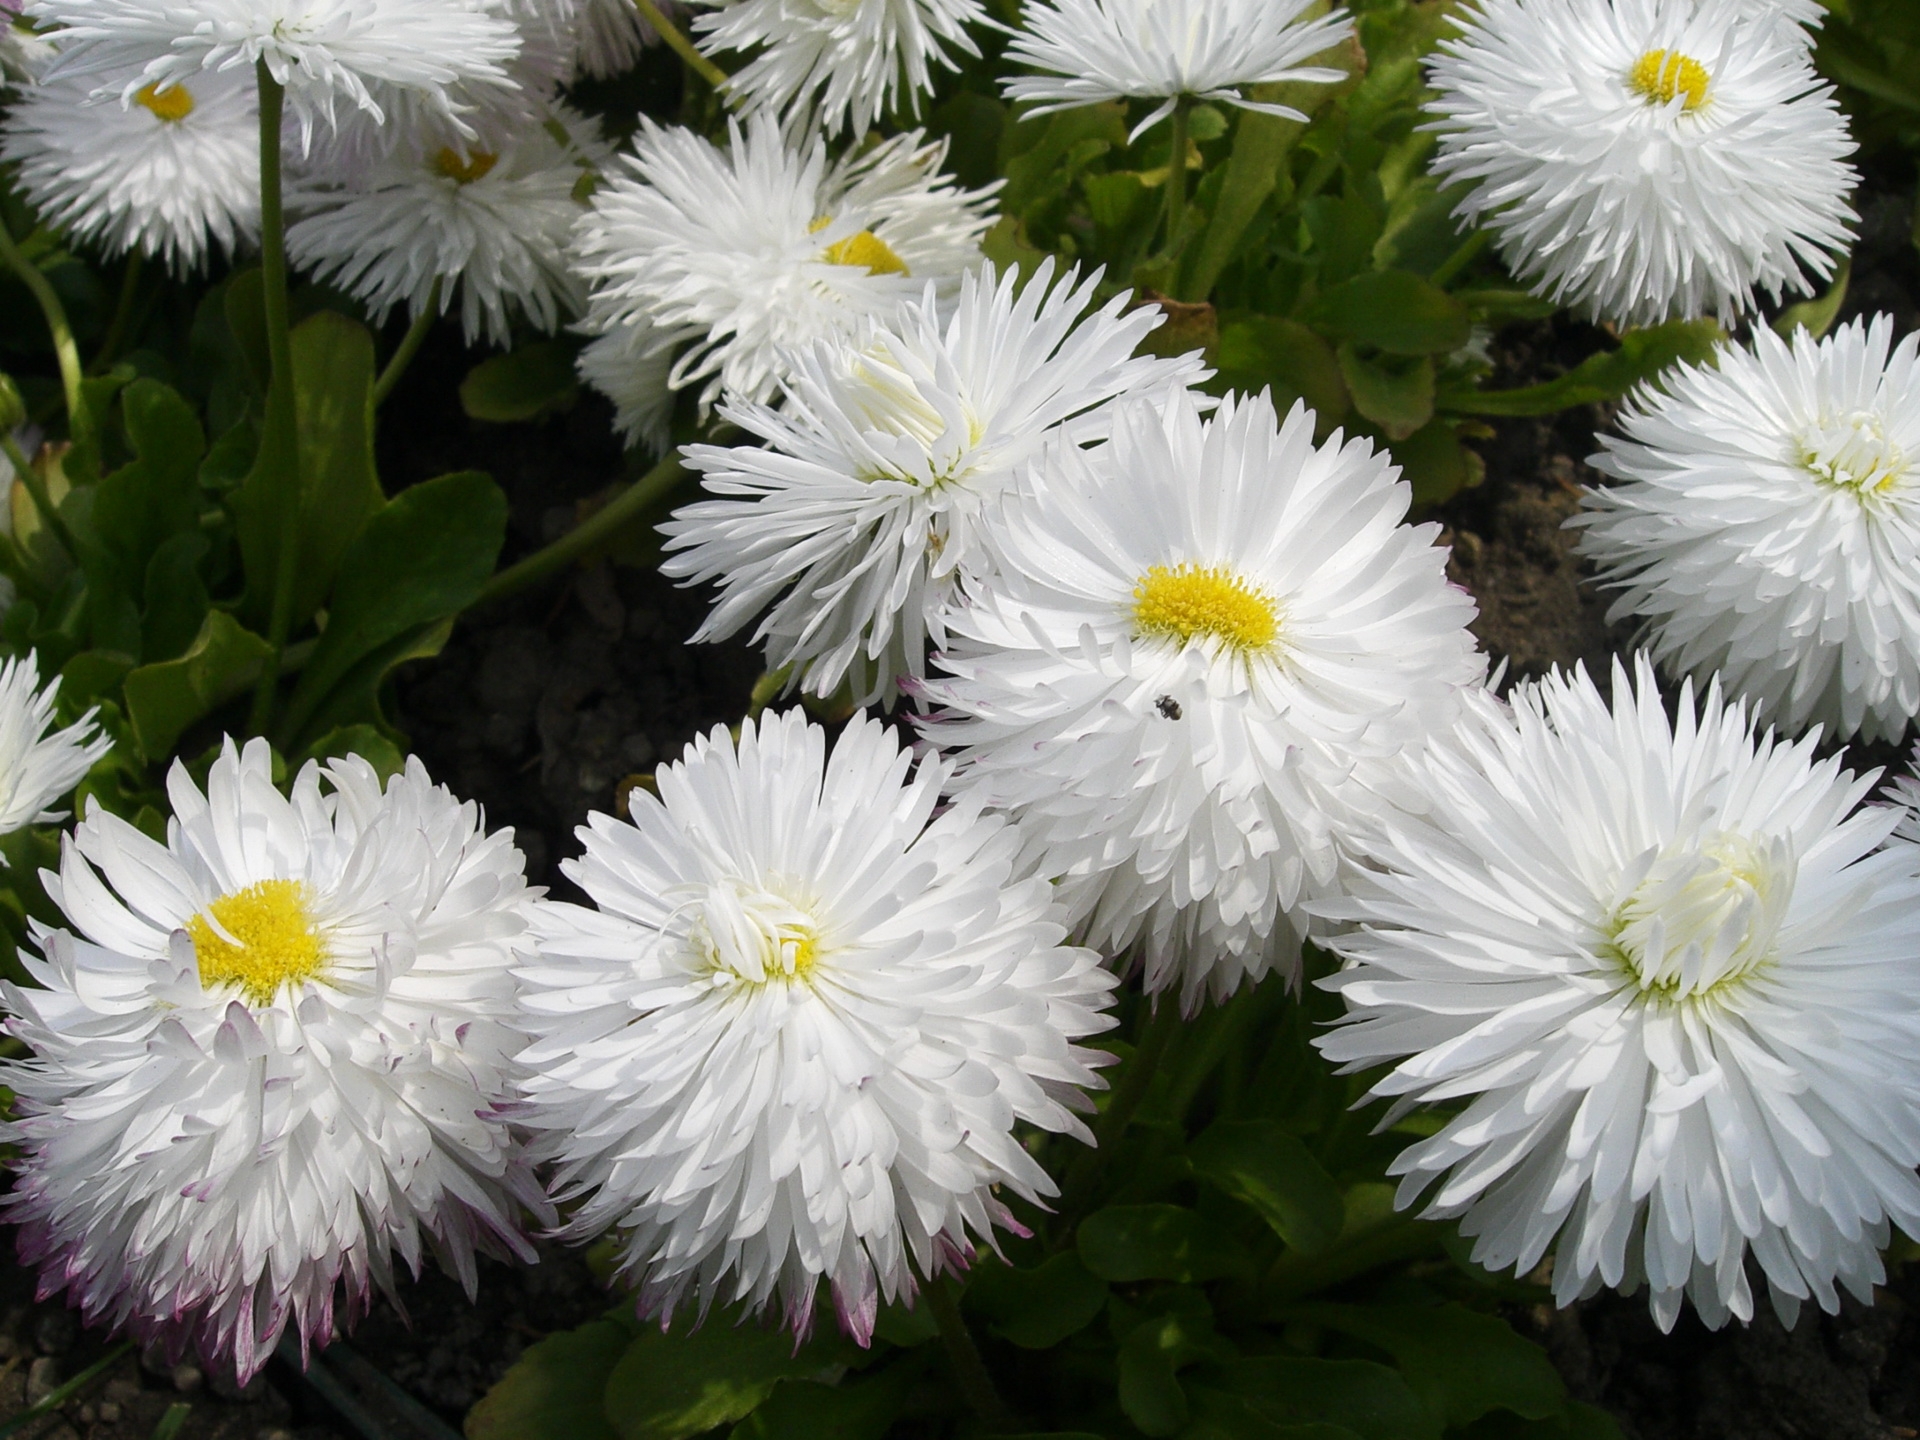 white, greens, flowers, close up, snow white, daisies